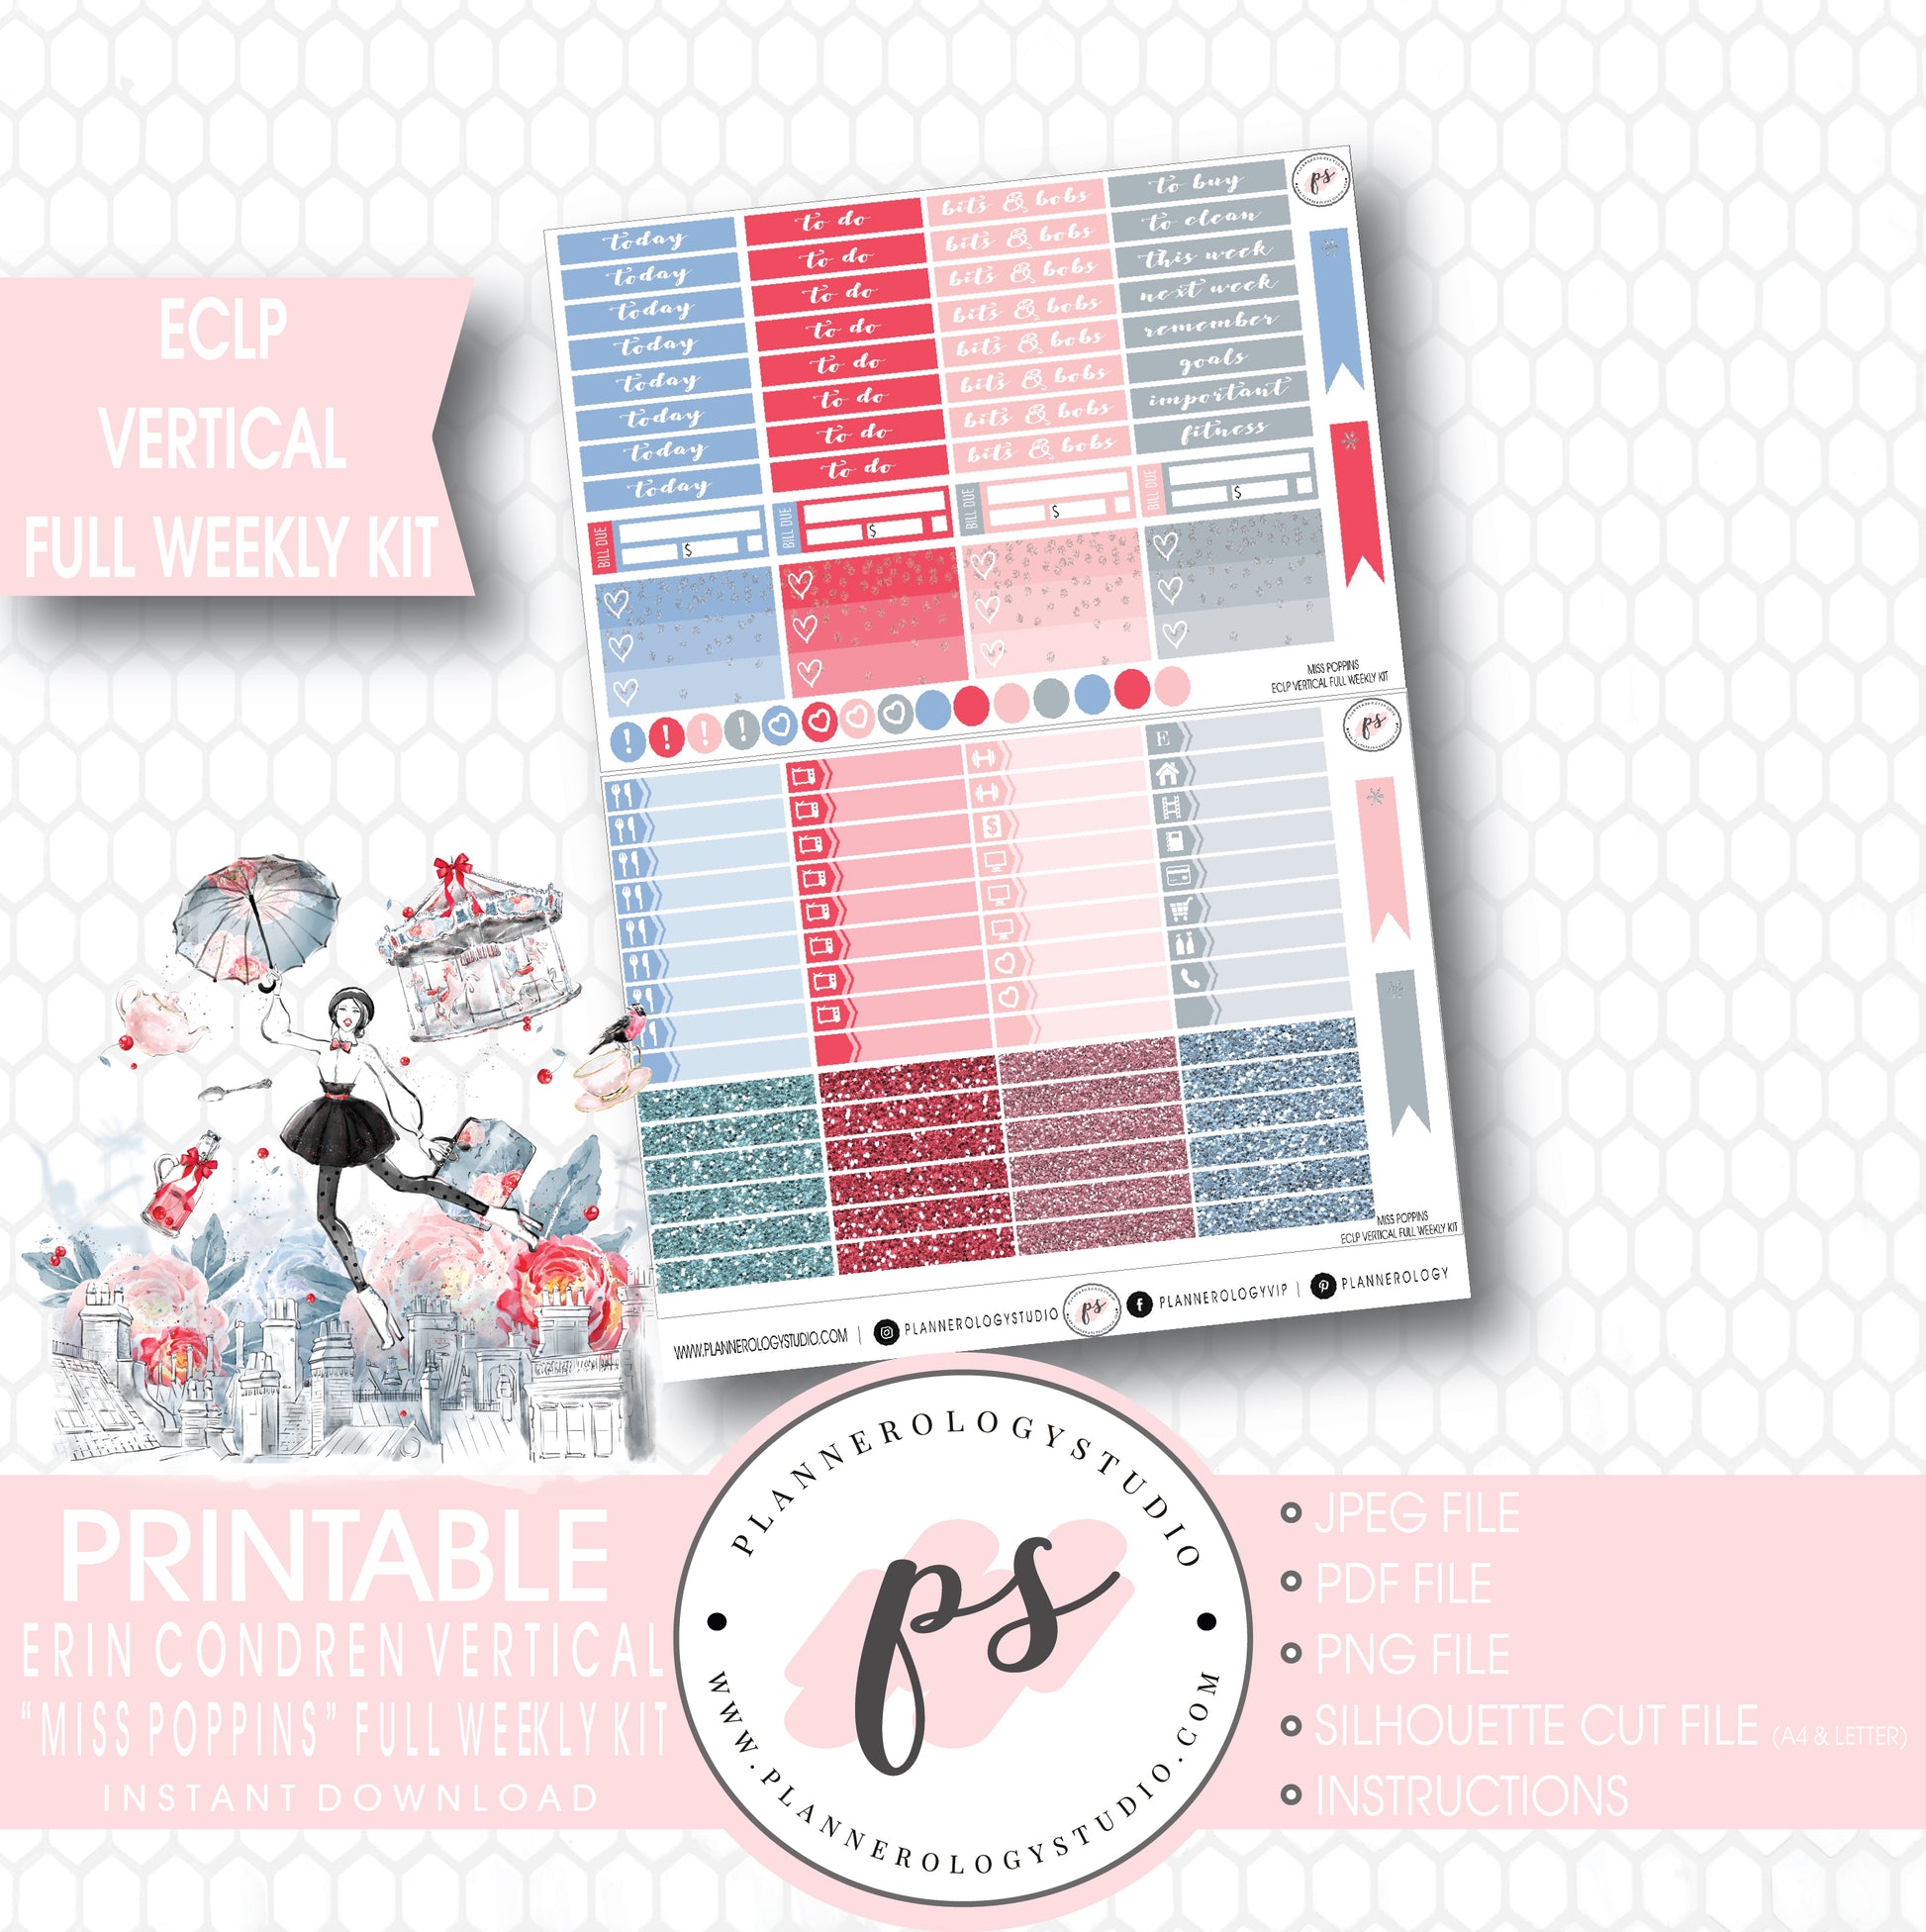 Miss Poppins (Mary Poppins) Full Weekly Kit Printable Planner Stickers (for use with ECLP Vertical) - Plannerologystudio